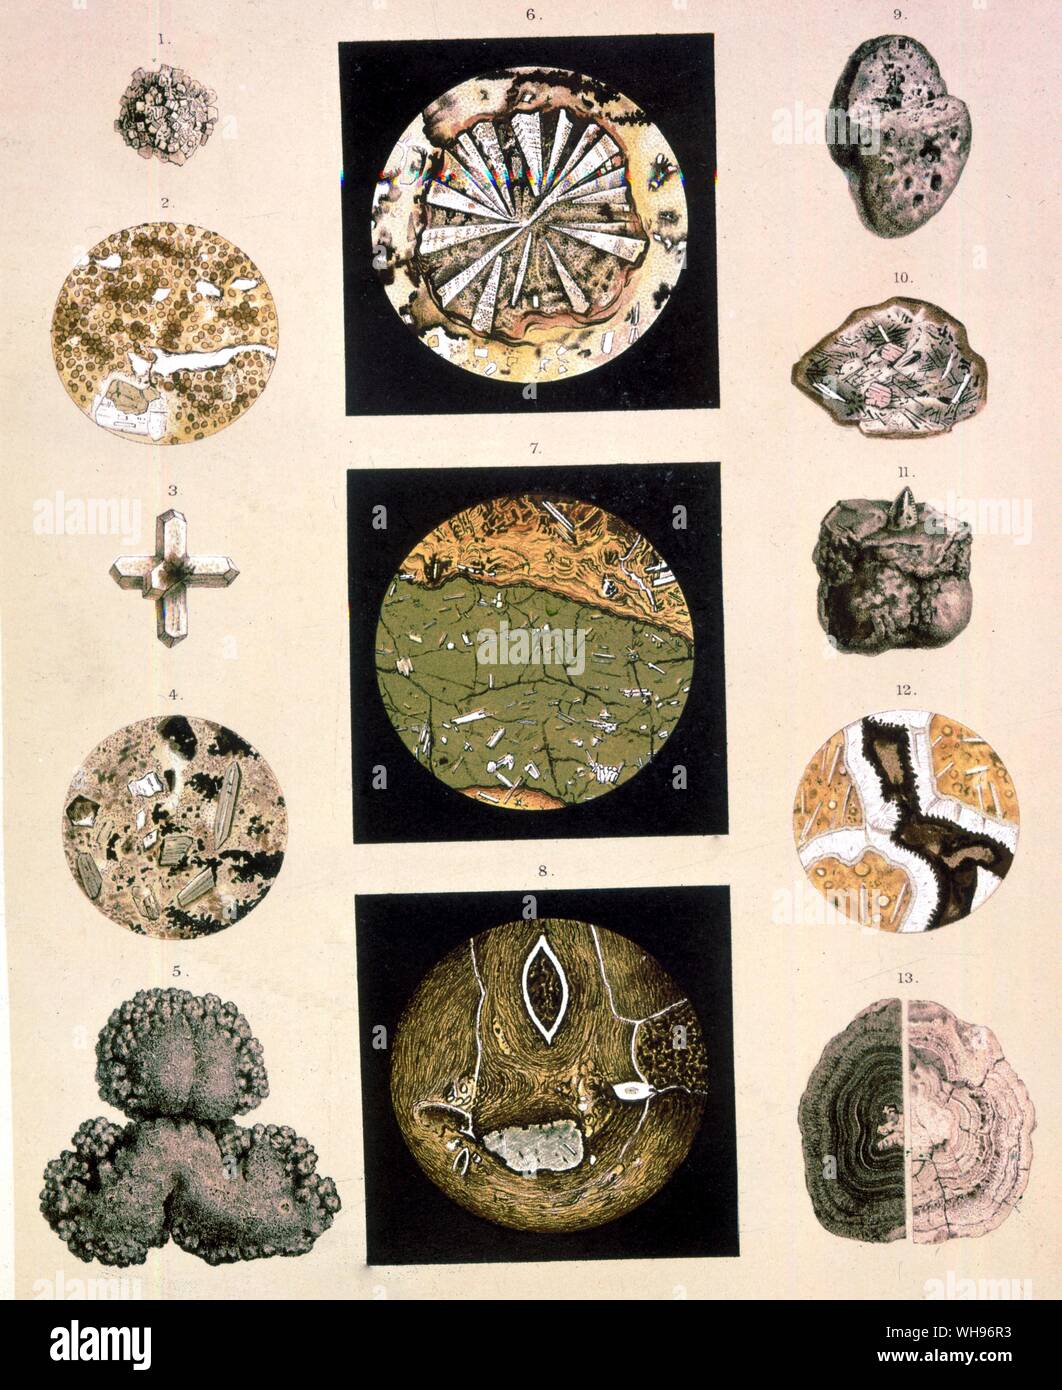 Minerals from the South Pacific. #s 5,9,10,11 and 13 are manganese nodules, #11 containing a shark's tooth and #8 is a microscopic detail of manganese. #s 1,3 adn 12 show philipsite crystals and #s 2,4,6, and 7 are of volcanic origin, dredged from the sea's bottom. Stock Photo